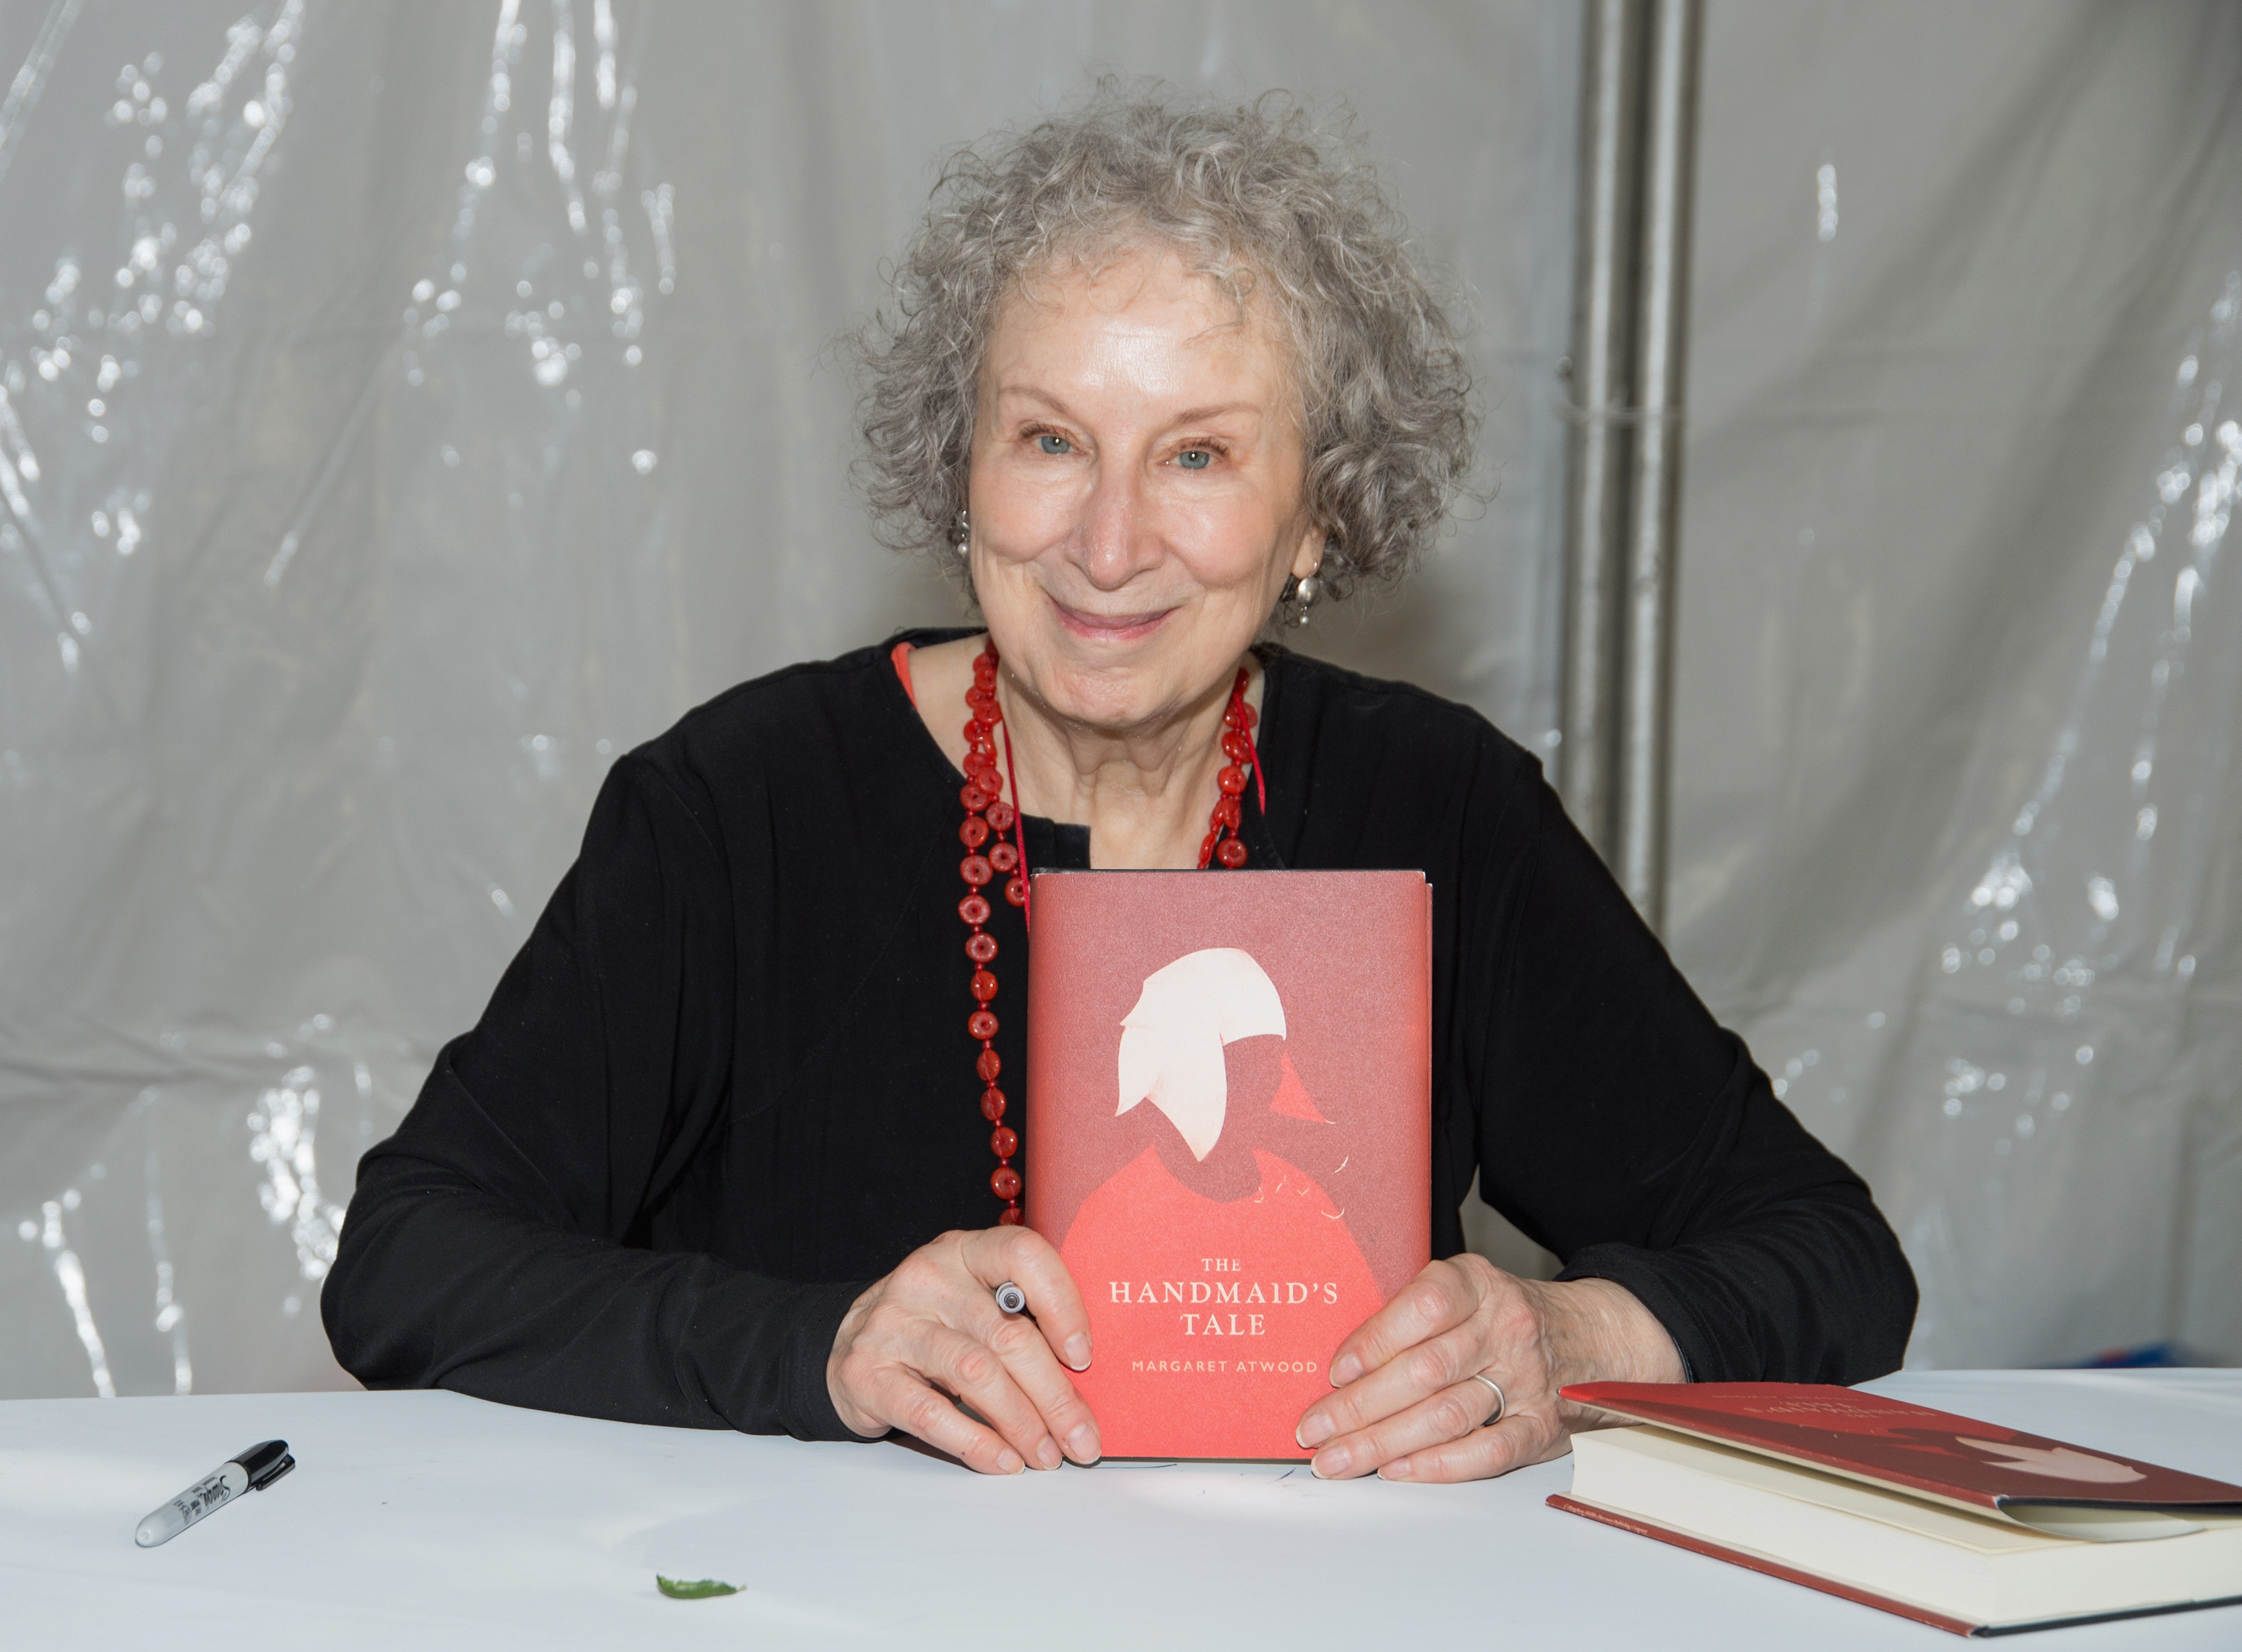 Margaret Atwood at a table